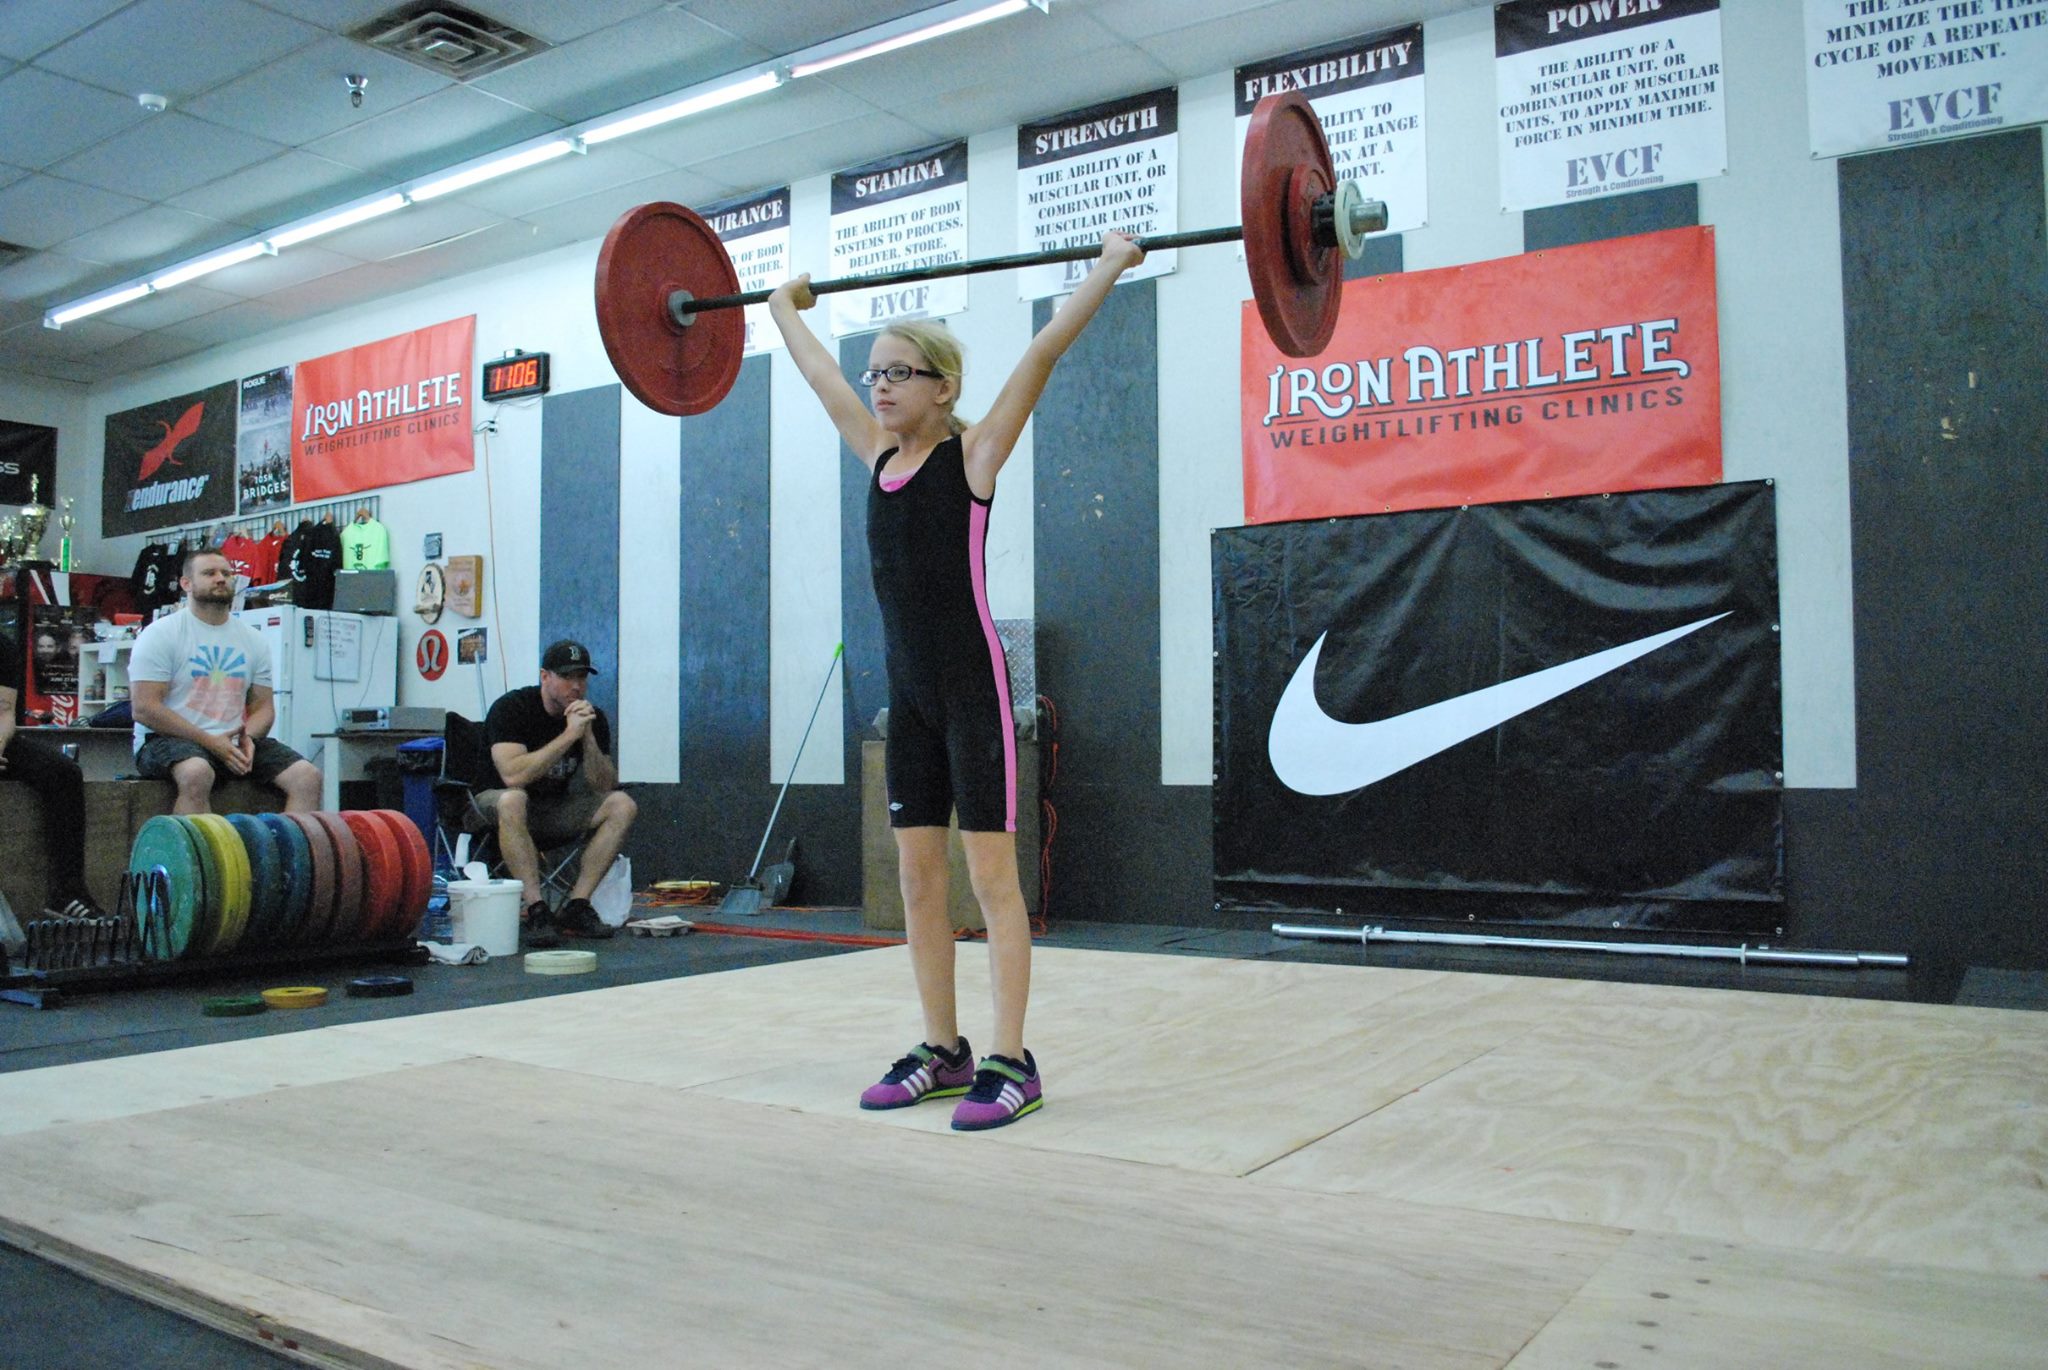 Girl Lifting At The Iron Athlete Open Weightlifting Meet